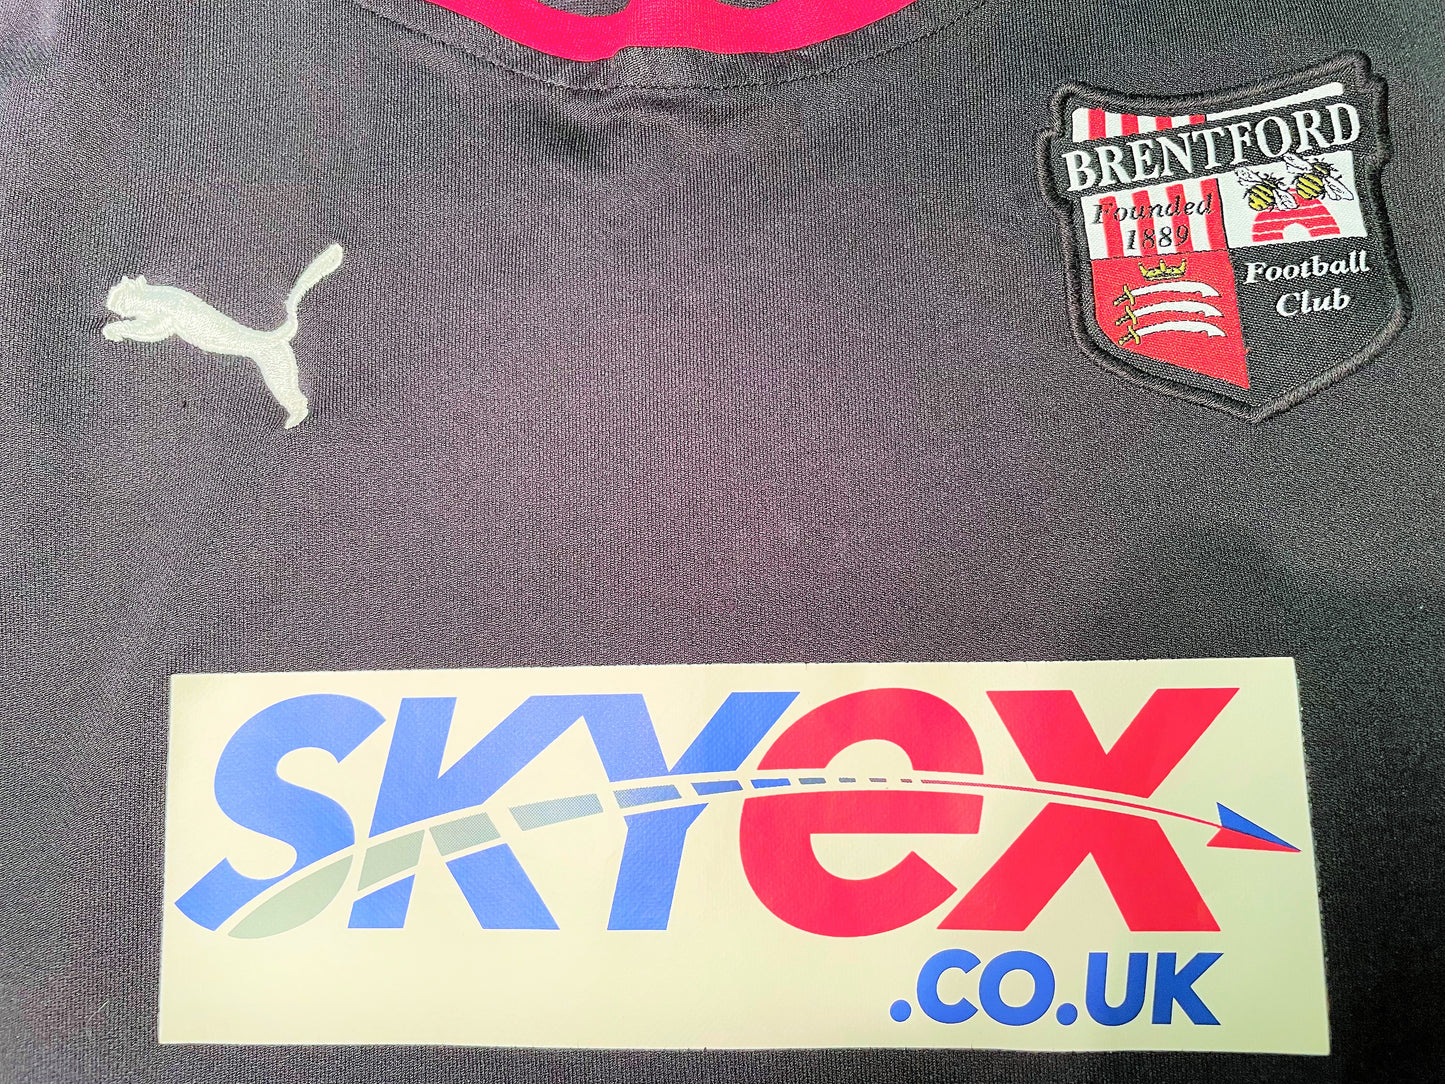 Brentford Away Shirt 2012/13 (very good) Adults XS/Youths 32/34. Height 20.5 inches